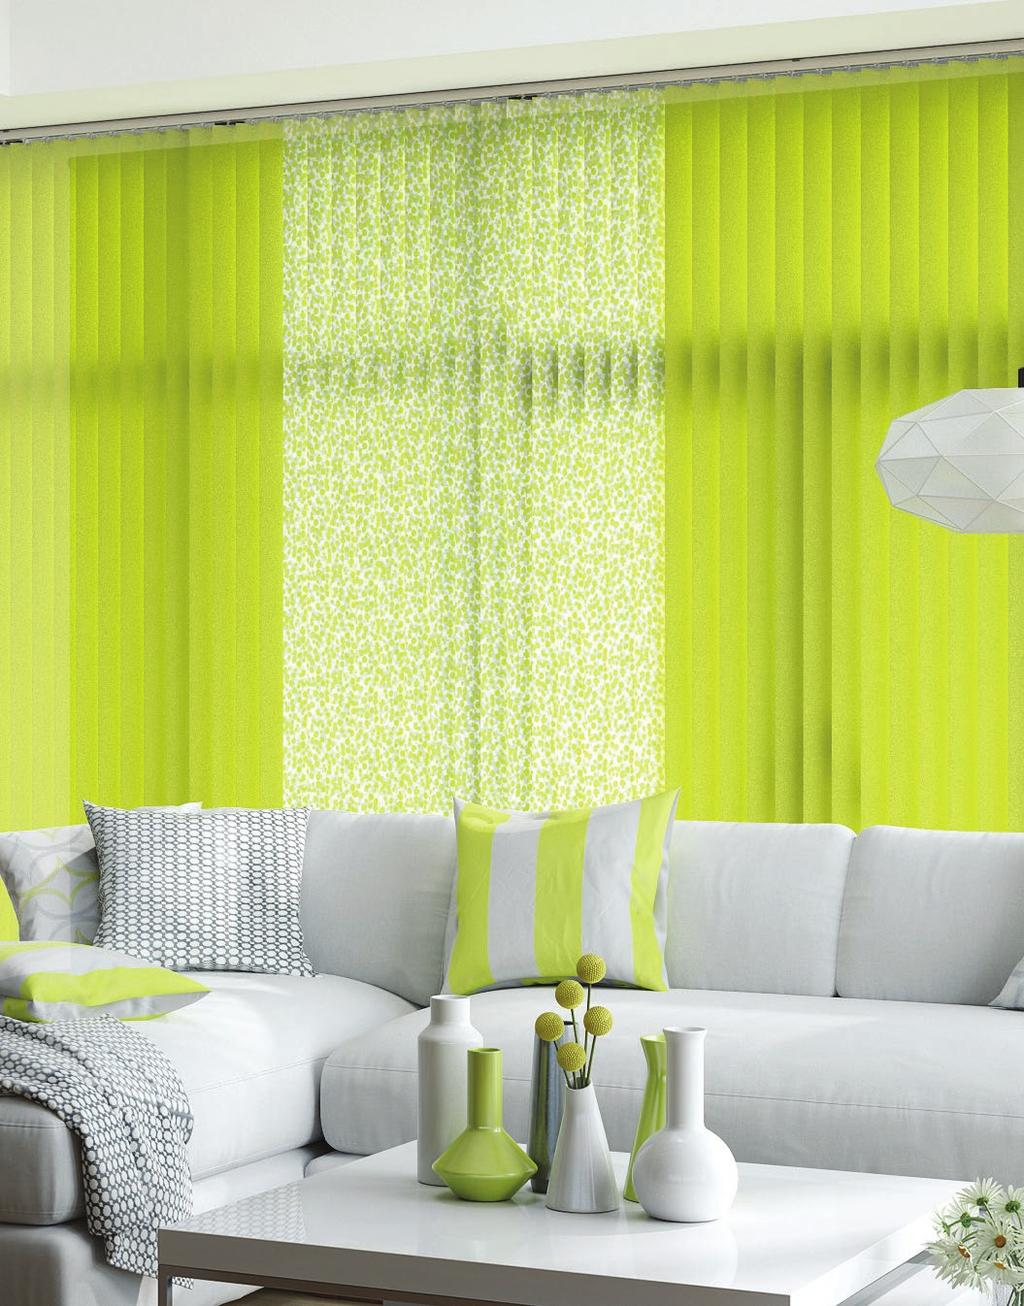 contemporary style try mixing and matching plain and patterned louvres to achieve a